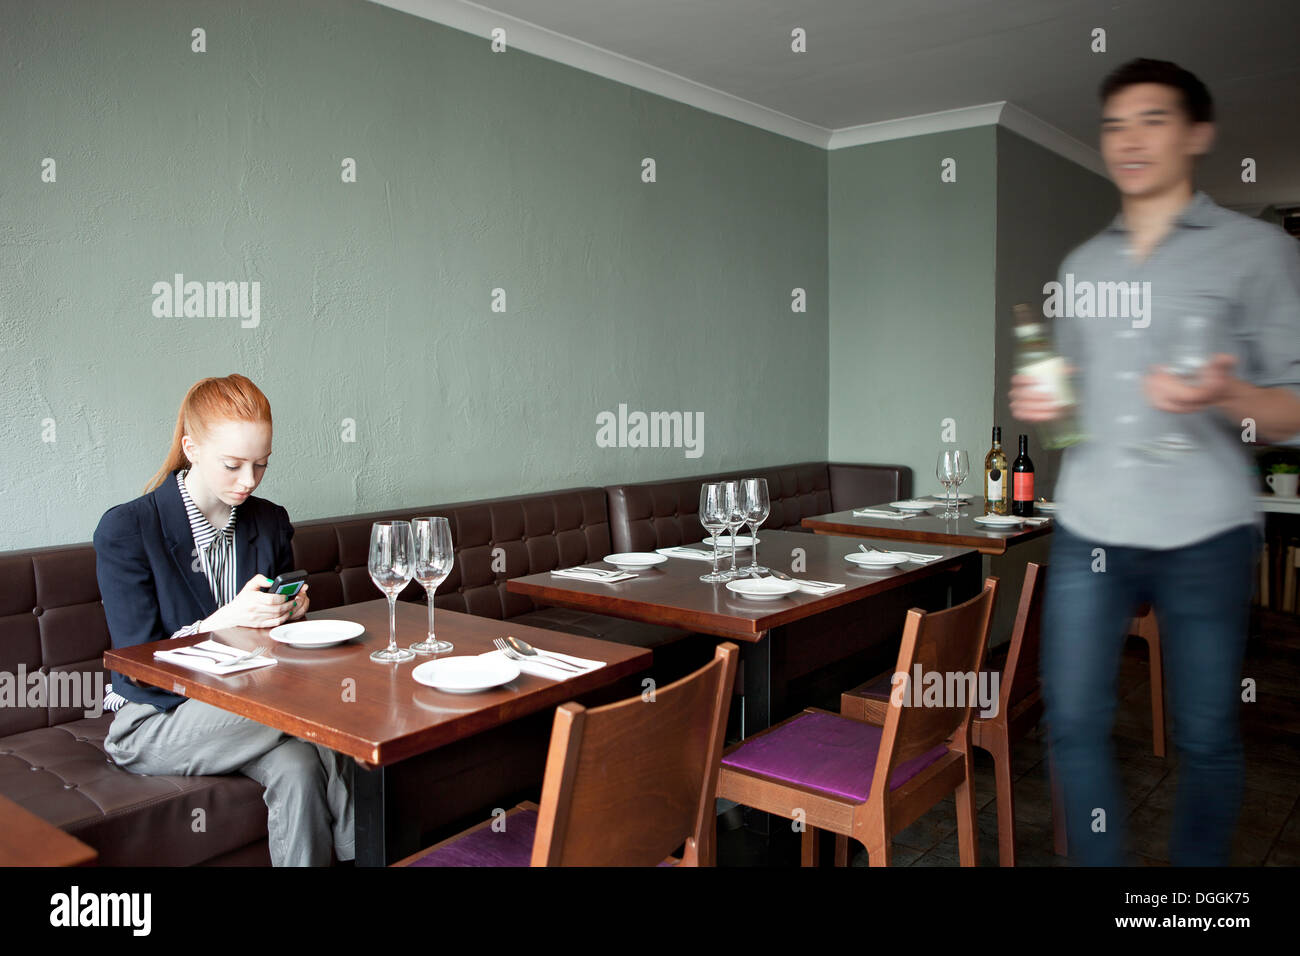 Young woman using cell phone in restaurant, waiter walking past Stock Photo